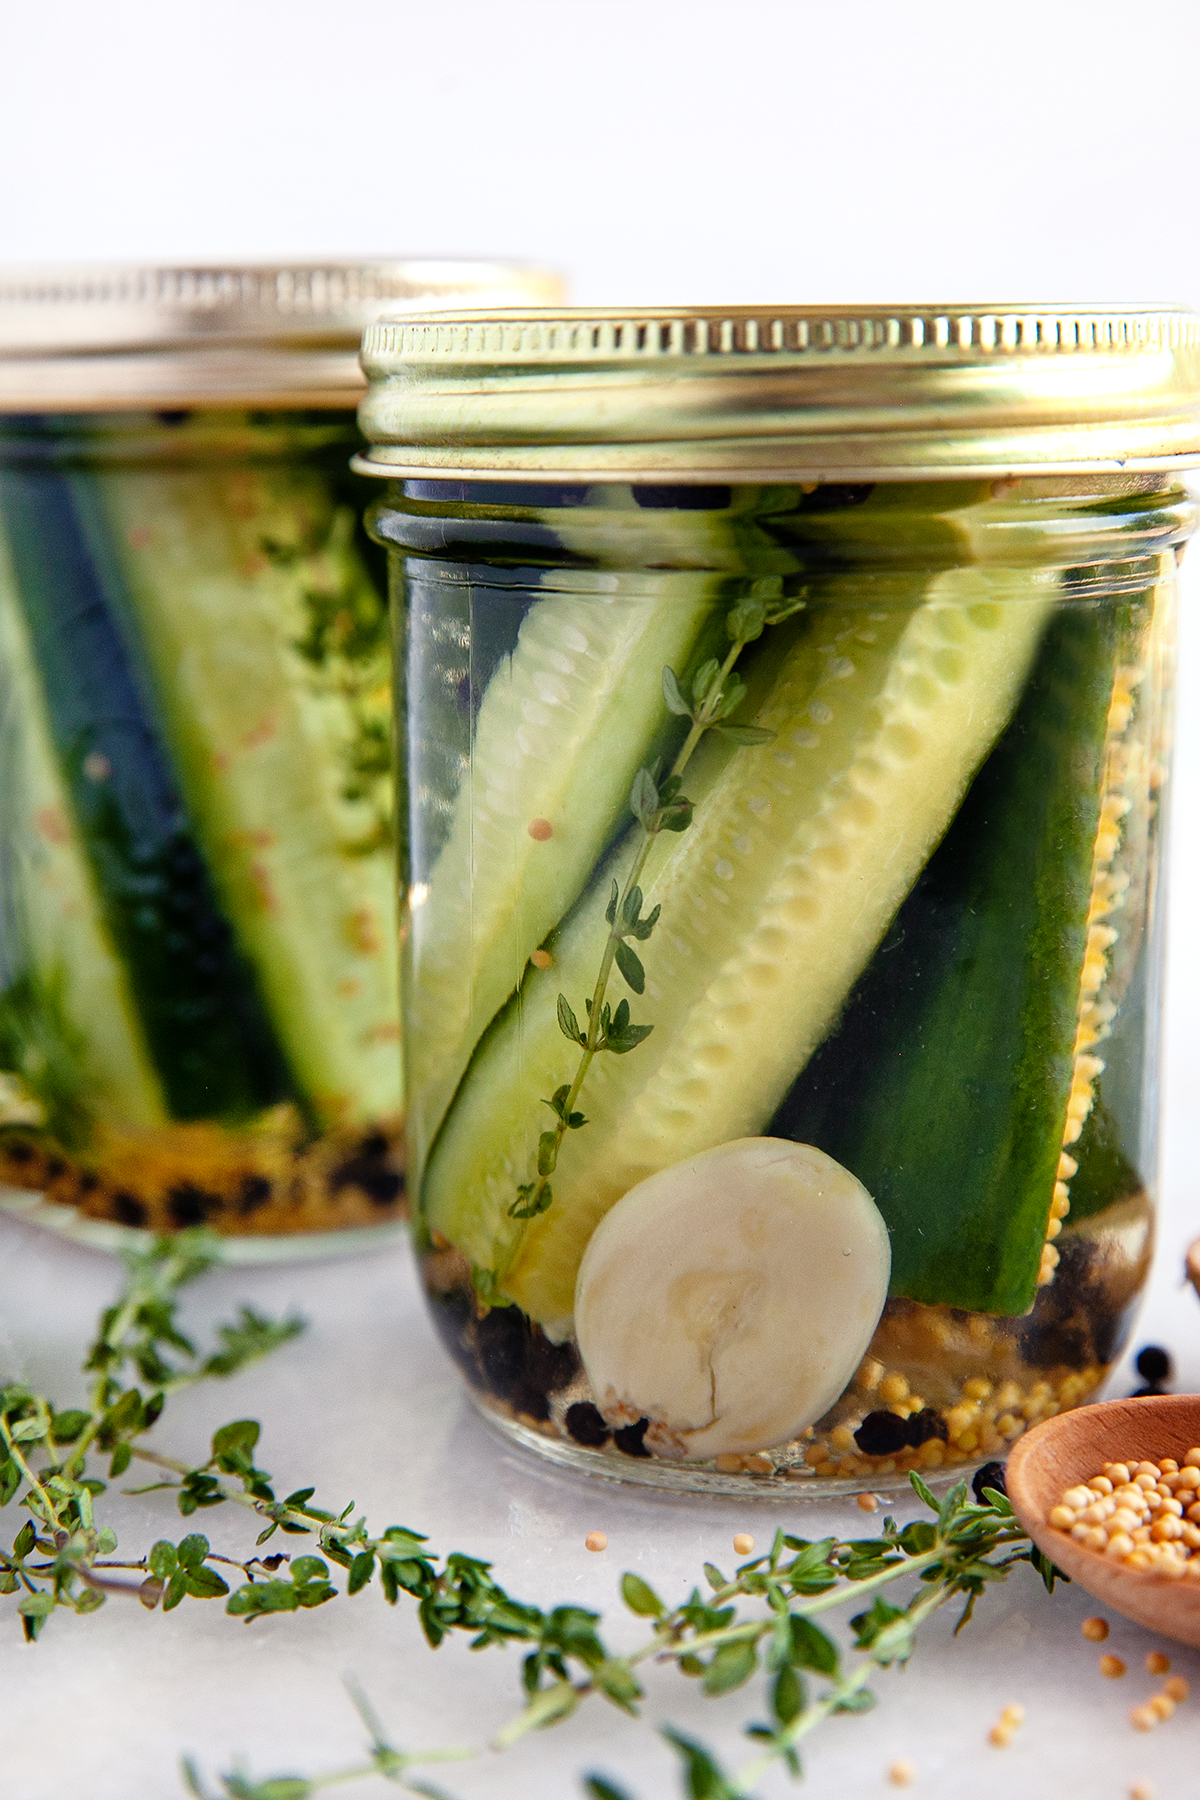 Smoked quick pickles in jars ready to be refrigerated.